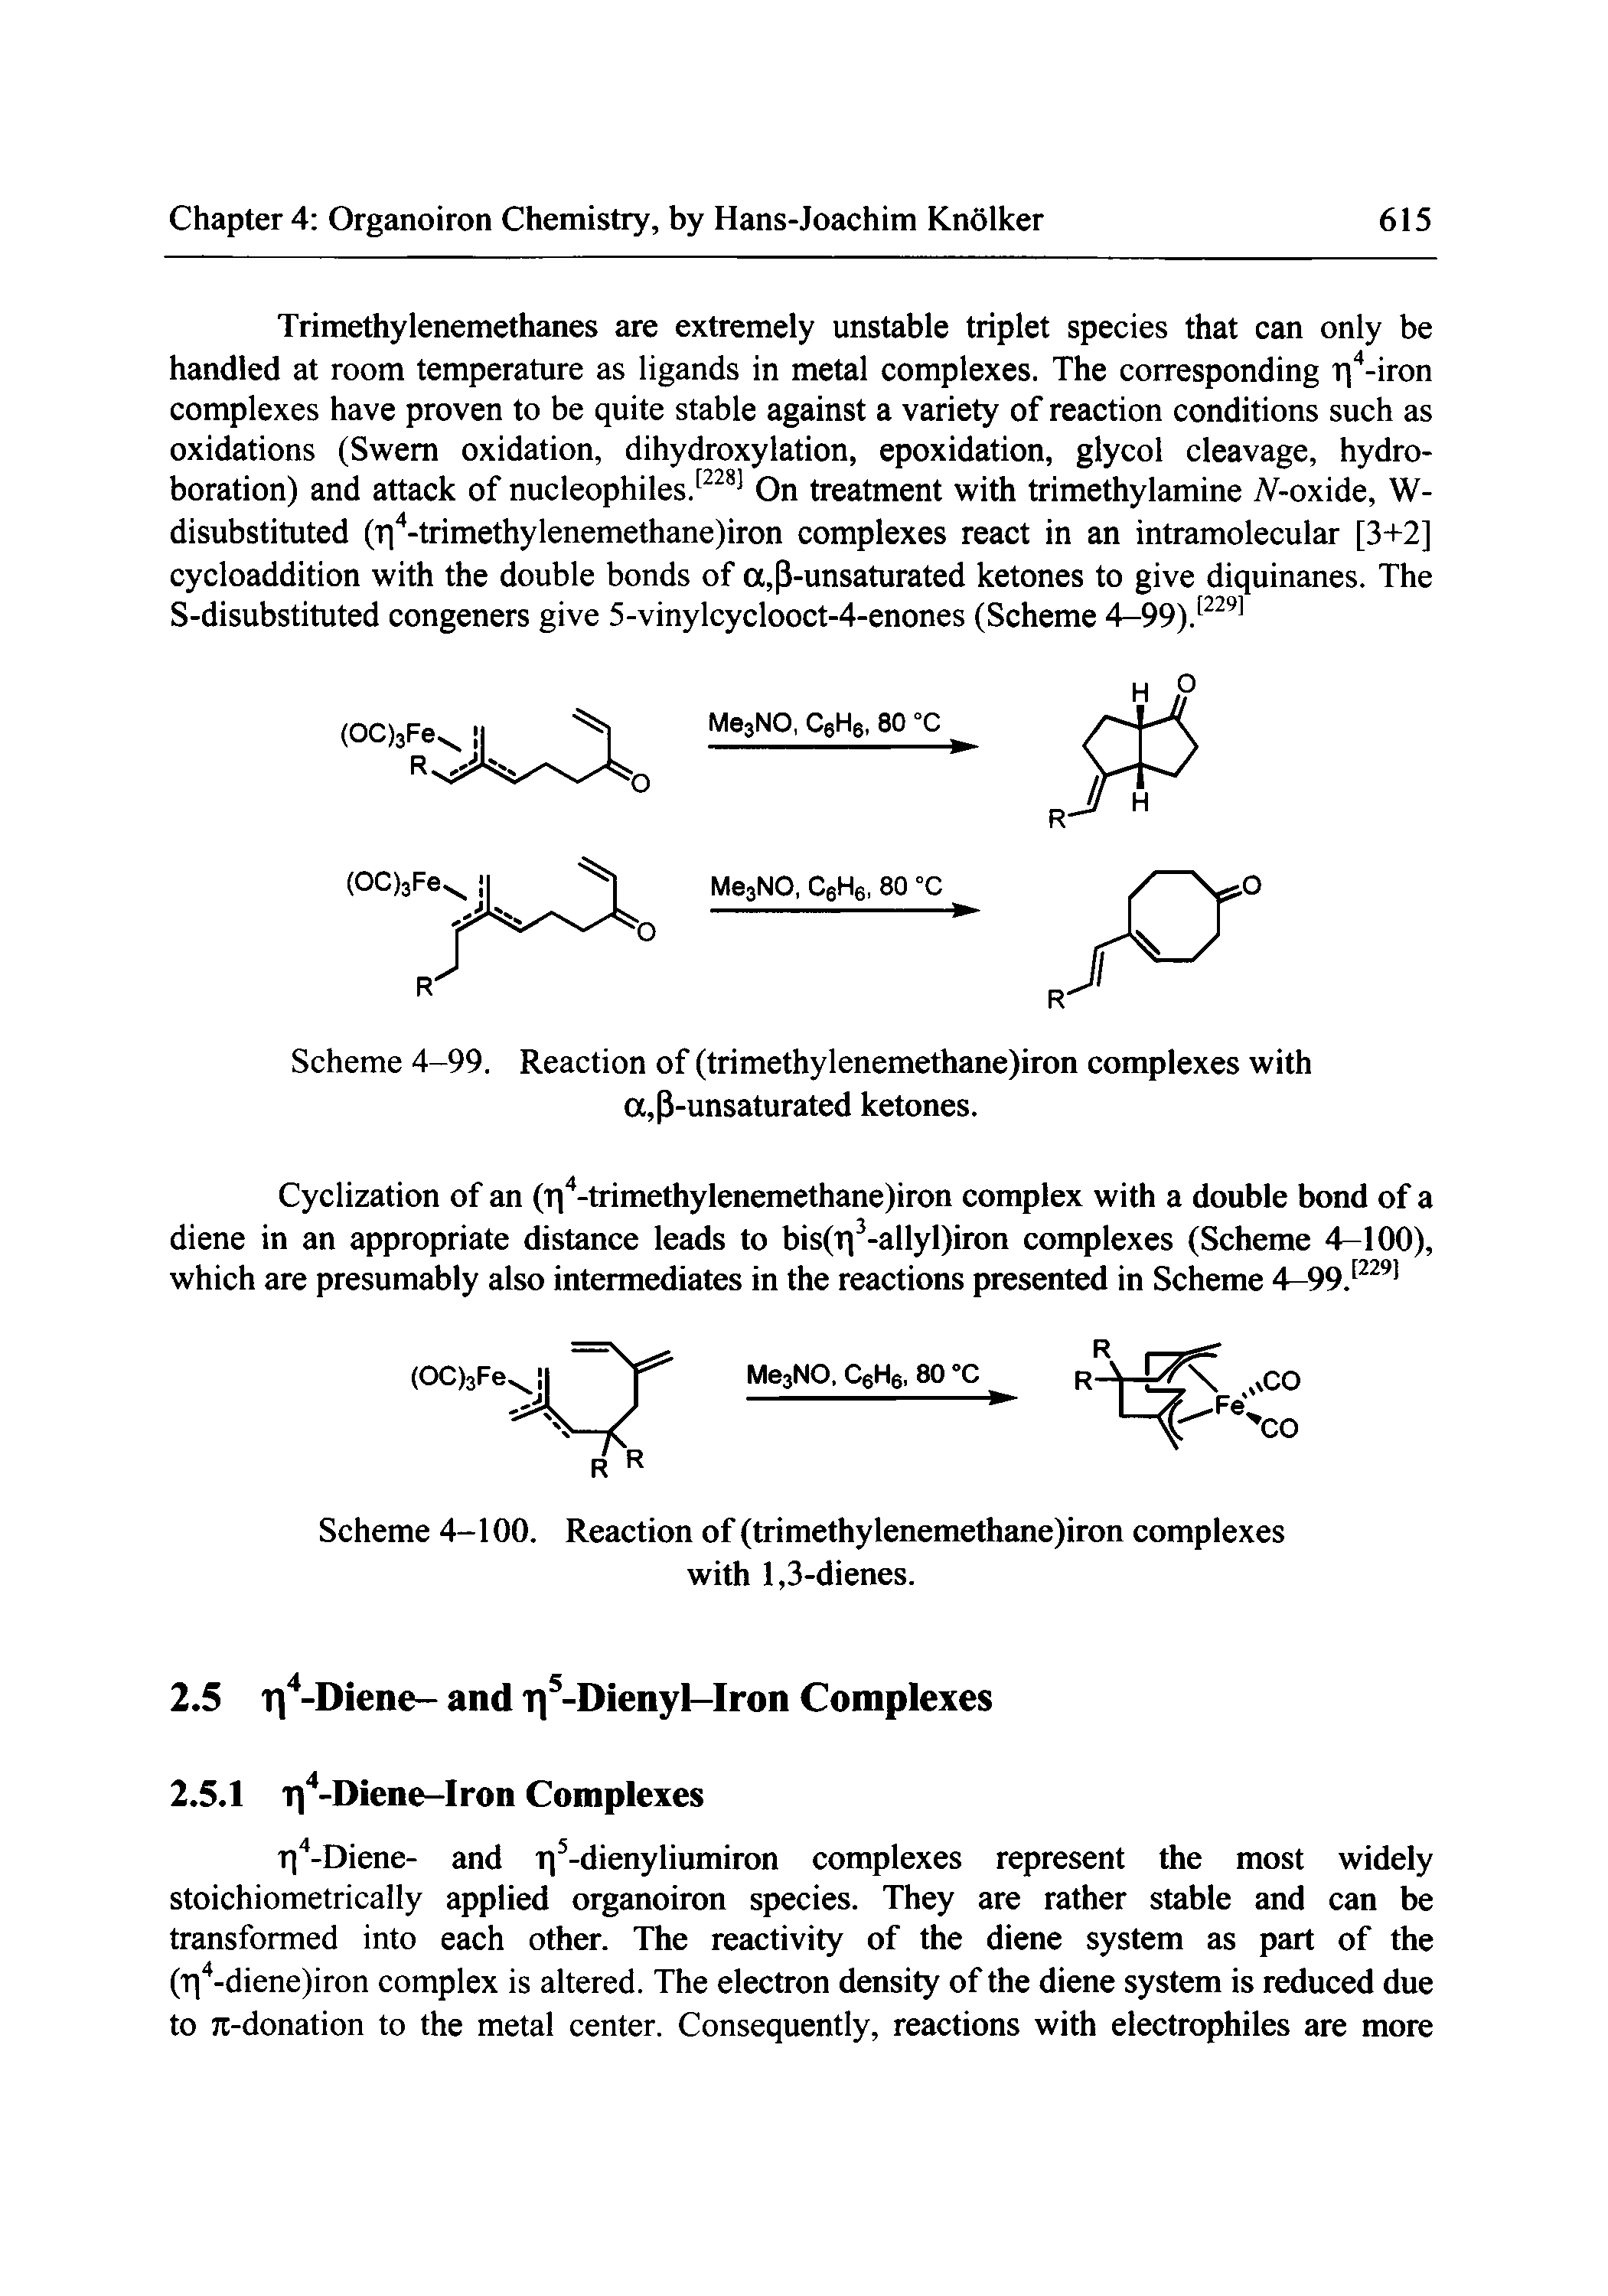 Scheme 4-99. Reaction of (trimethylenemethane)iron complexes with a,P unsaturated ketones.